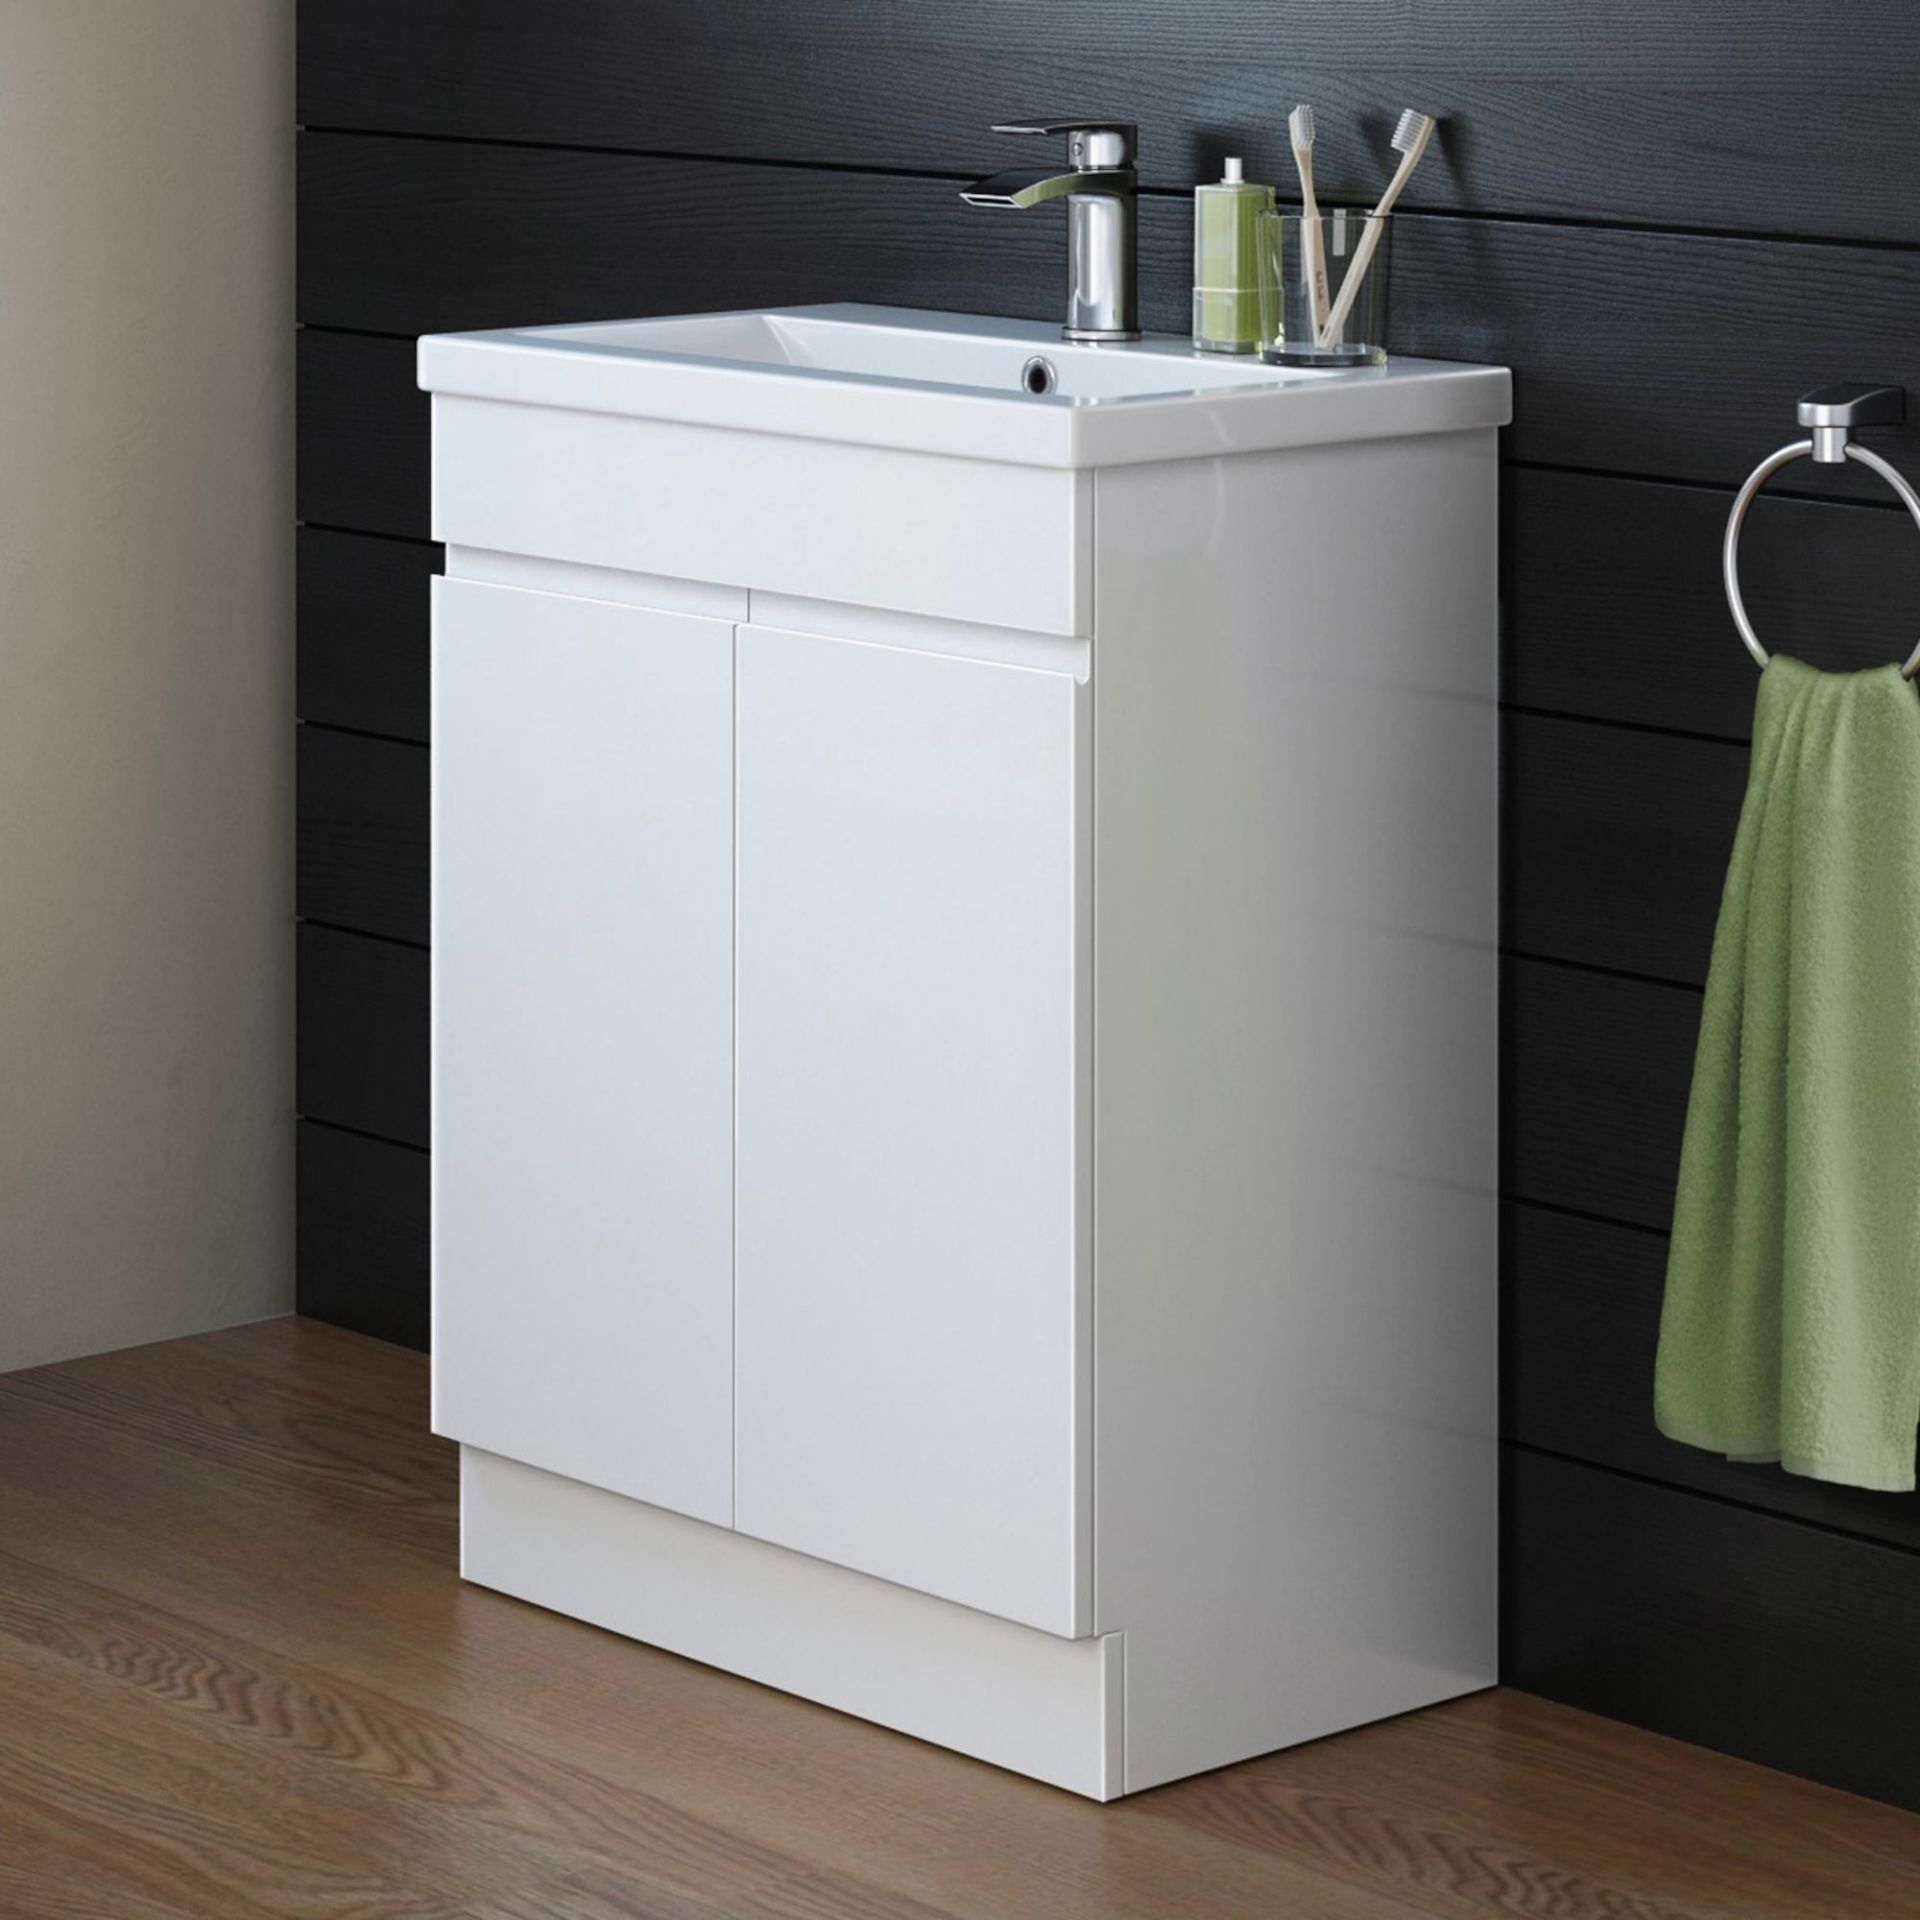 NEW BOXED 600mm Trent Gloss White Sink Cabinet - Floor Standing.RRP £499.99.Comes complete wit... - Image 2 of 4